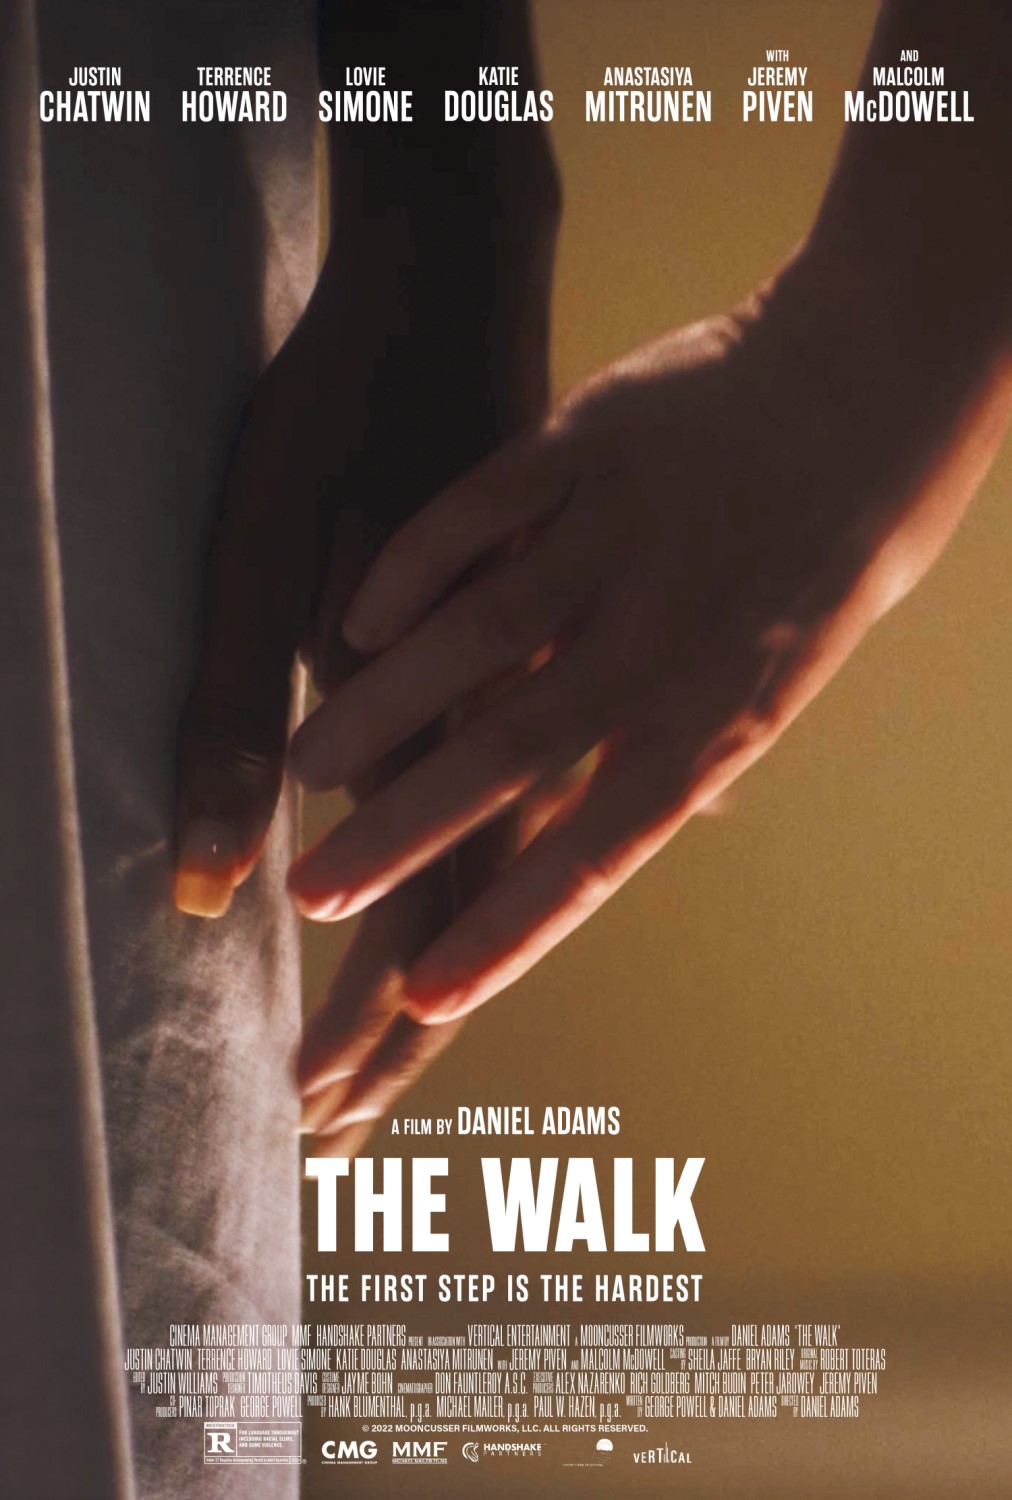 The Walk Trailer & Poster